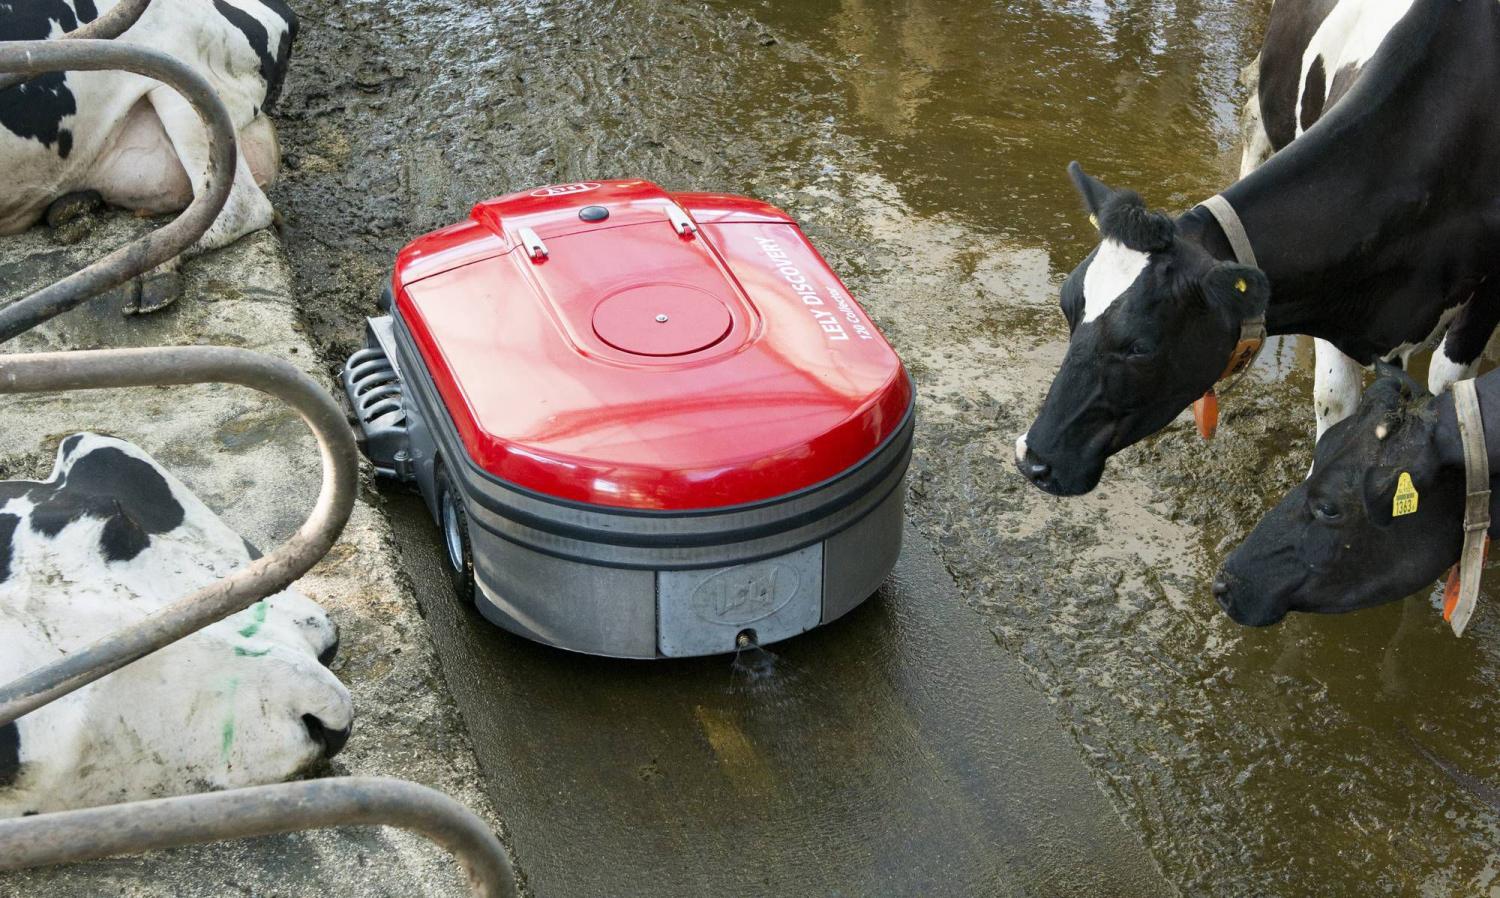 Lely Discovery Manure Cleaning Robot Vacuum Barn Floor Roomba